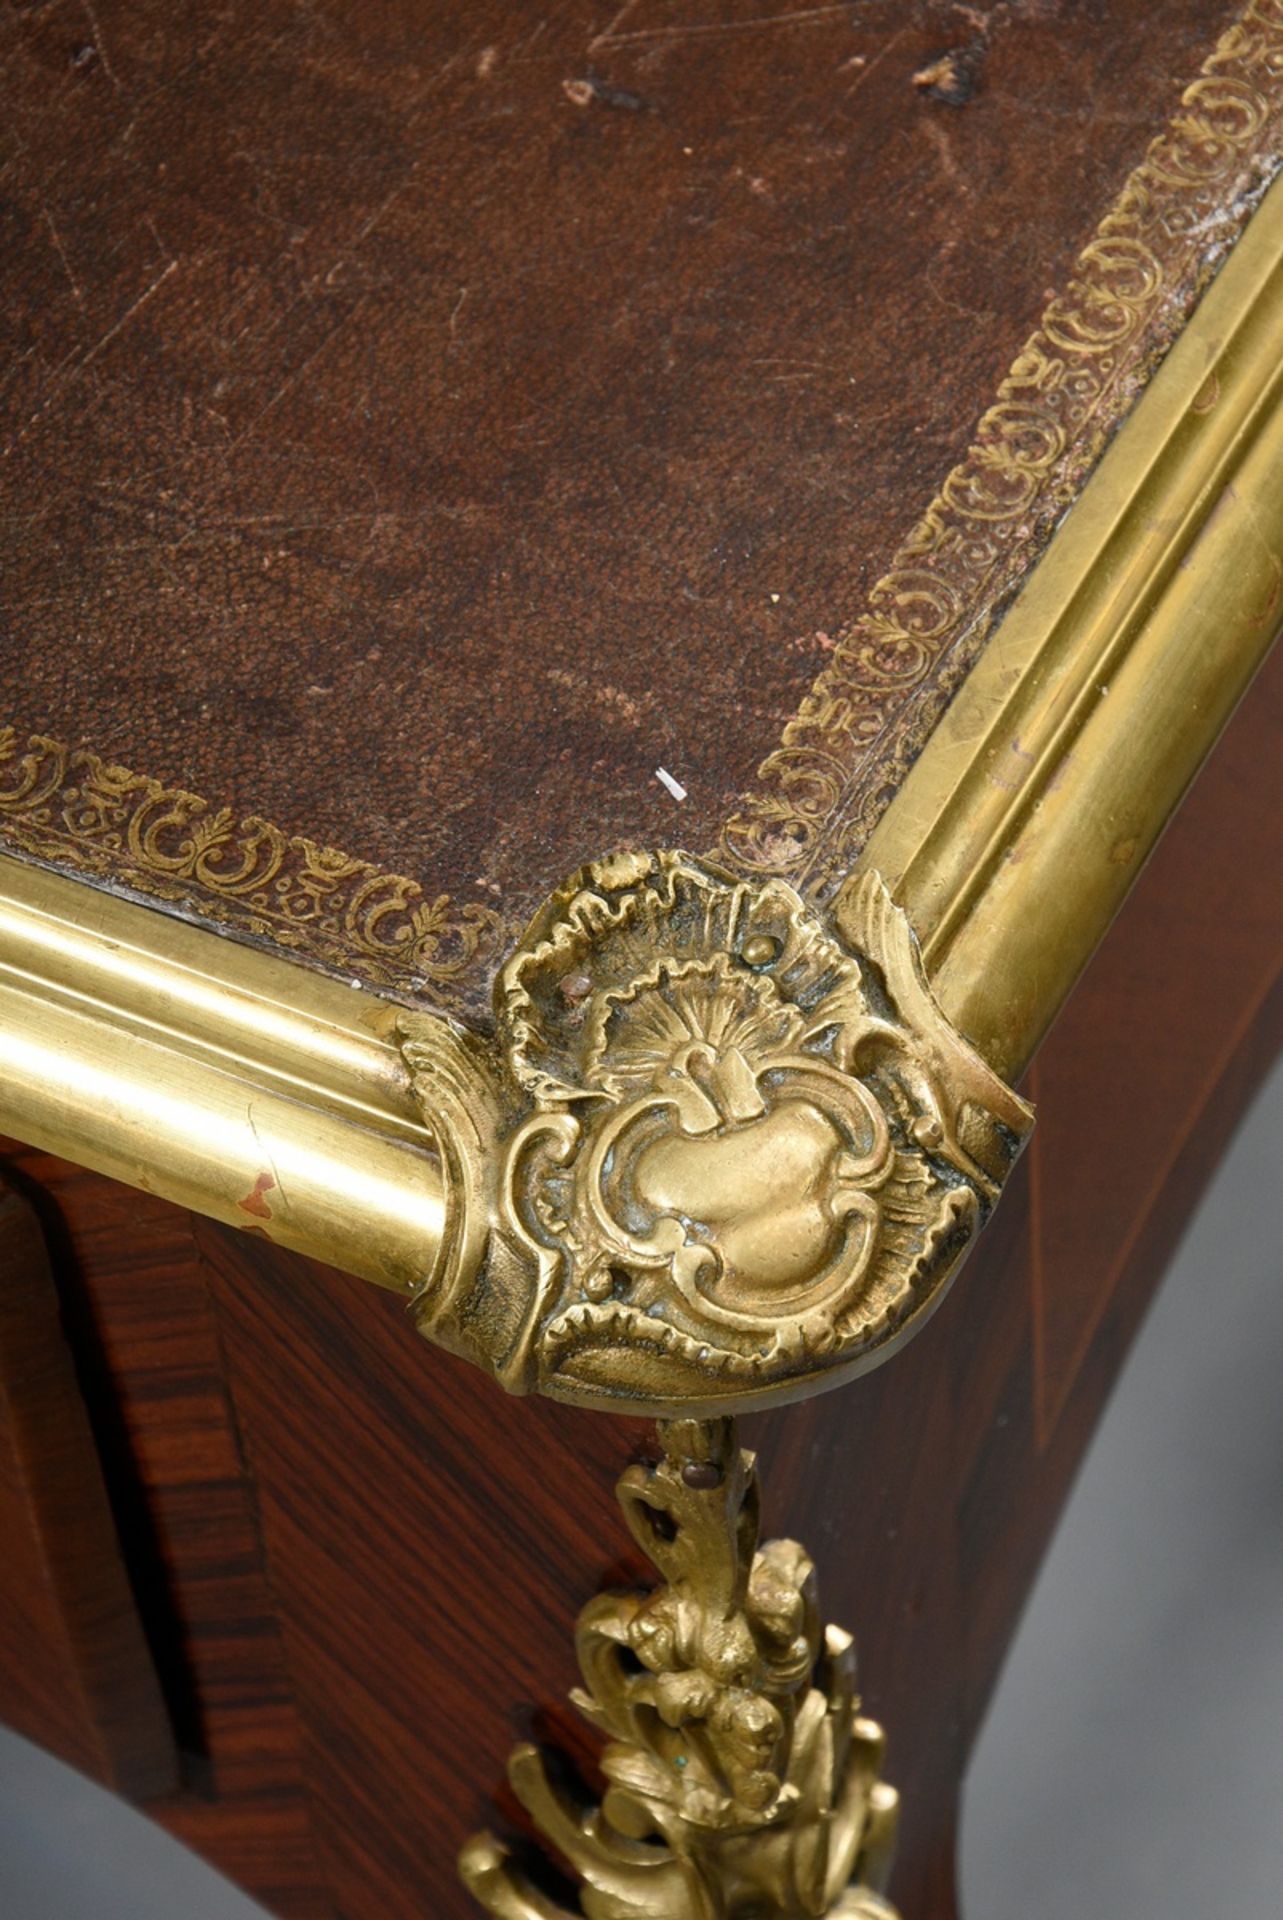 French bureau plat in Louis XV style on high curved legs with rich bronze fittings "busts of women" - Image 8 of 10